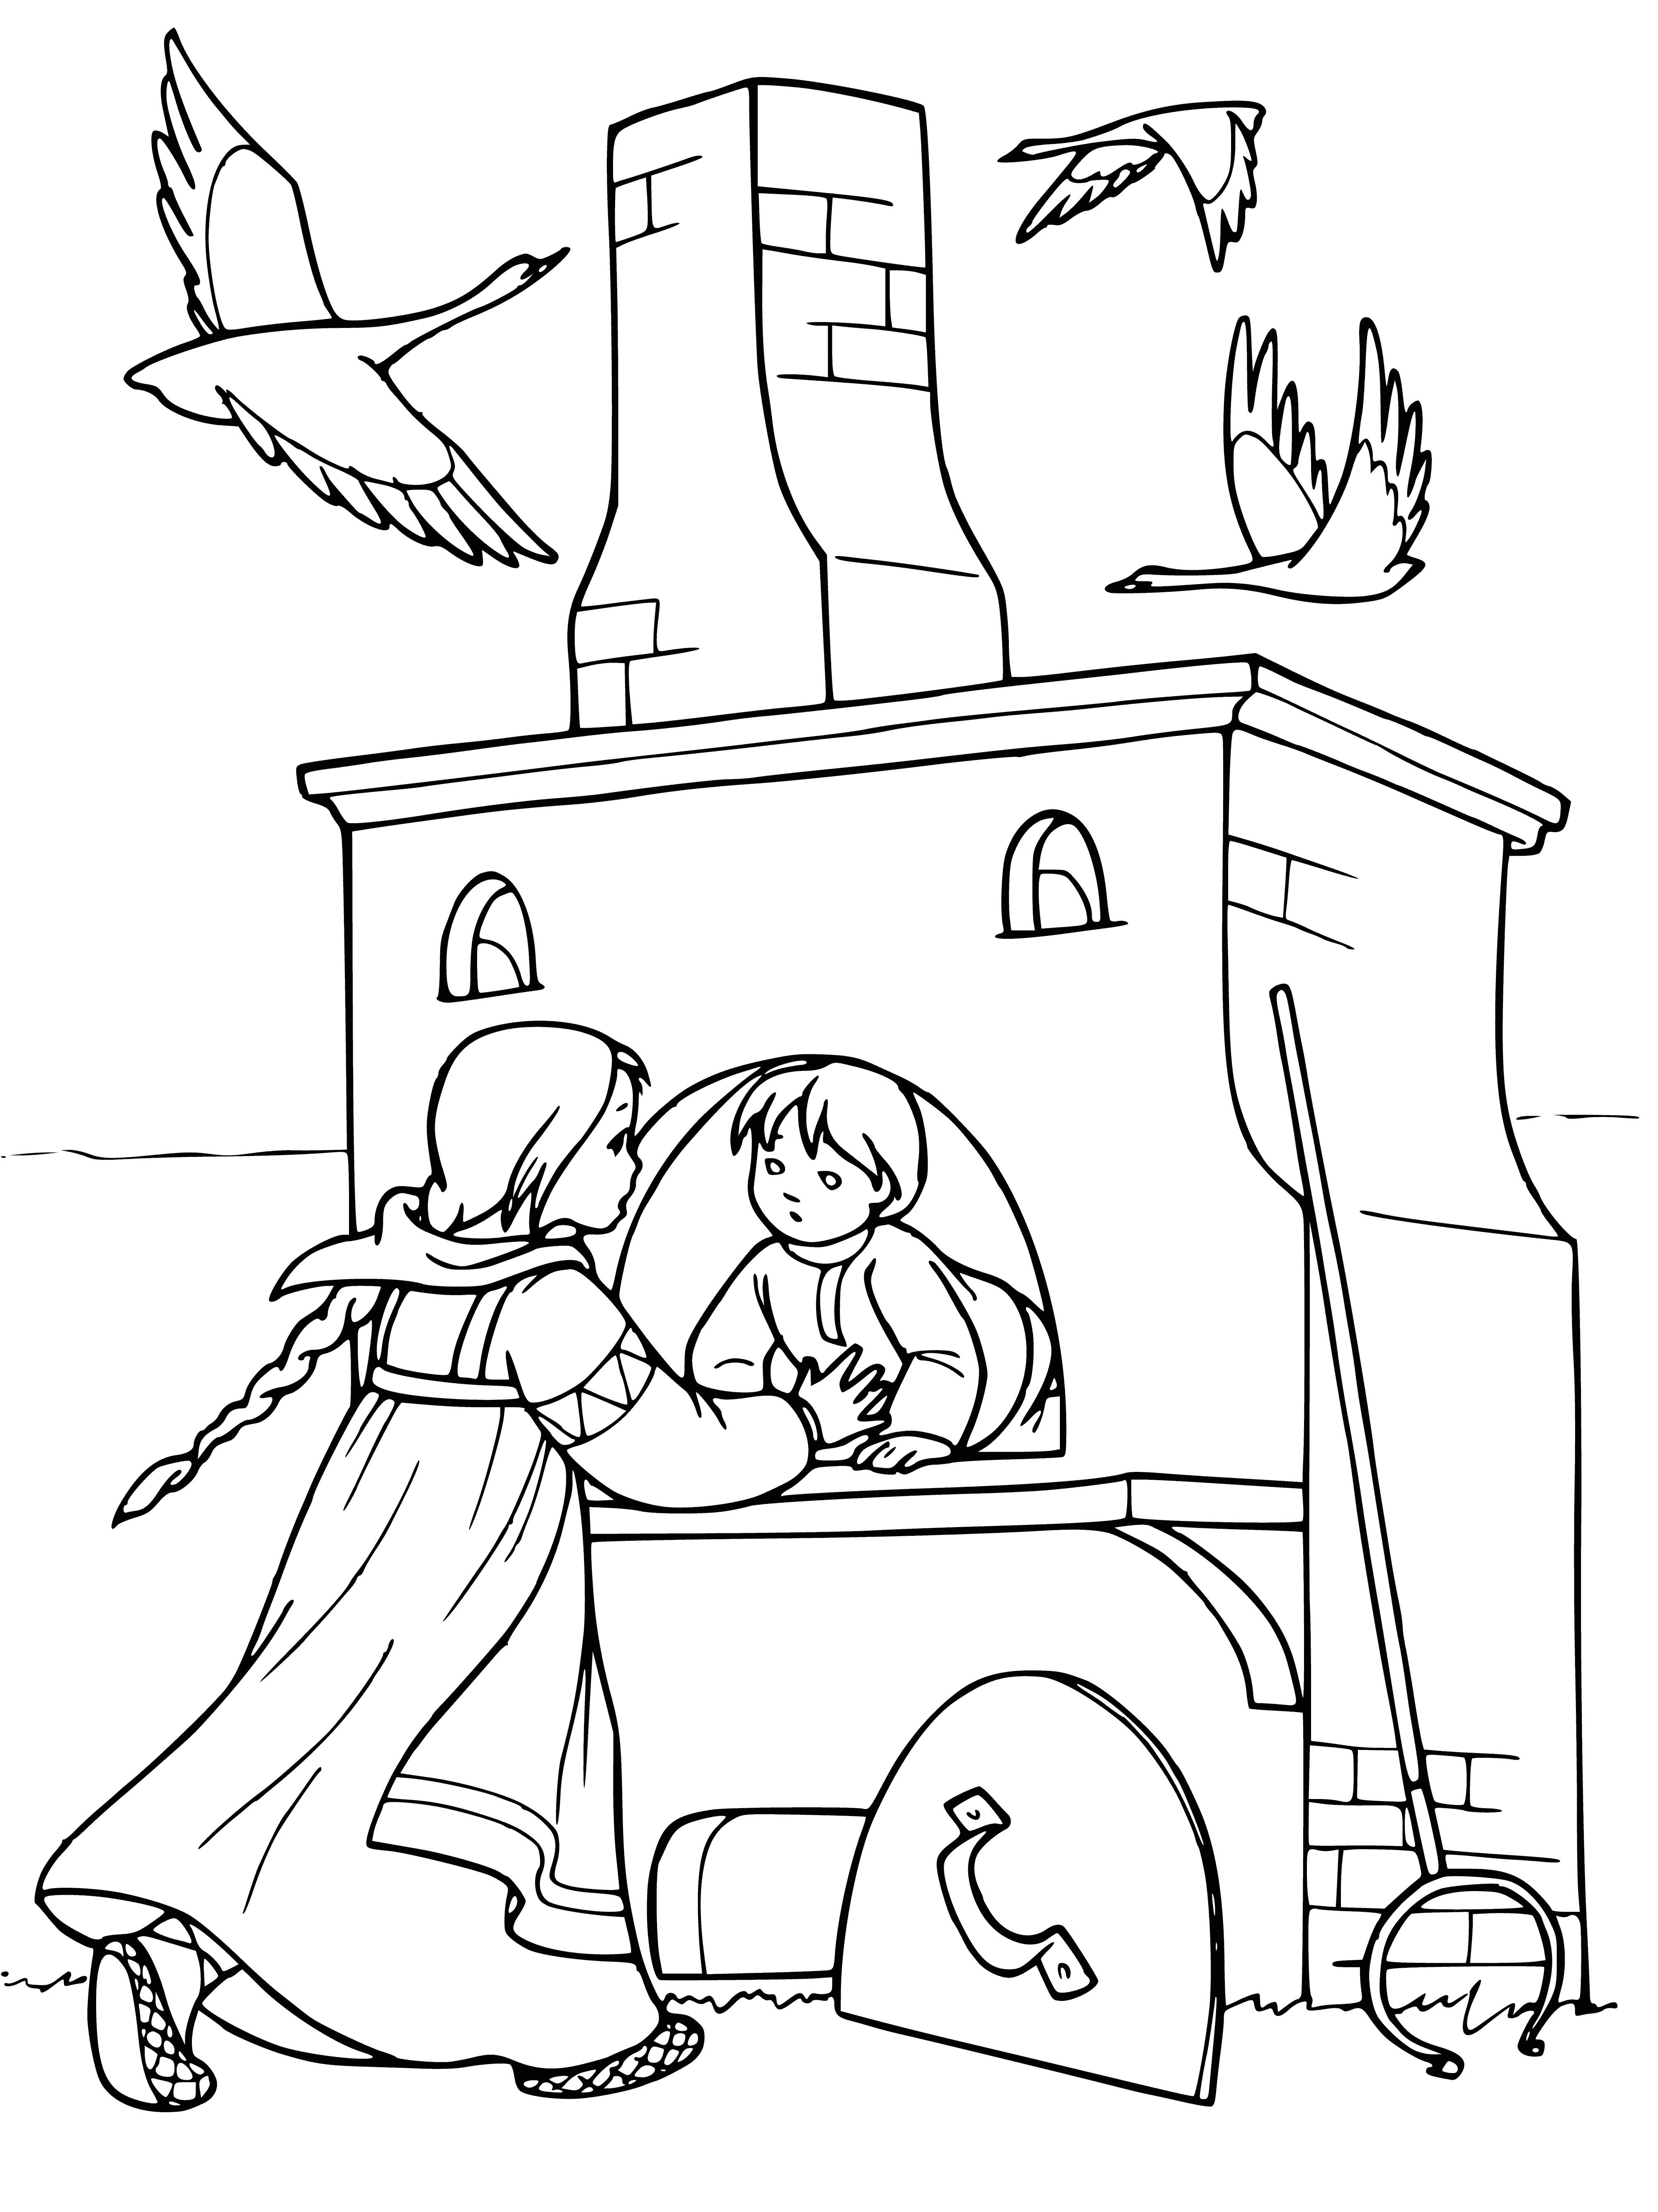 The stove hides the children coloring page